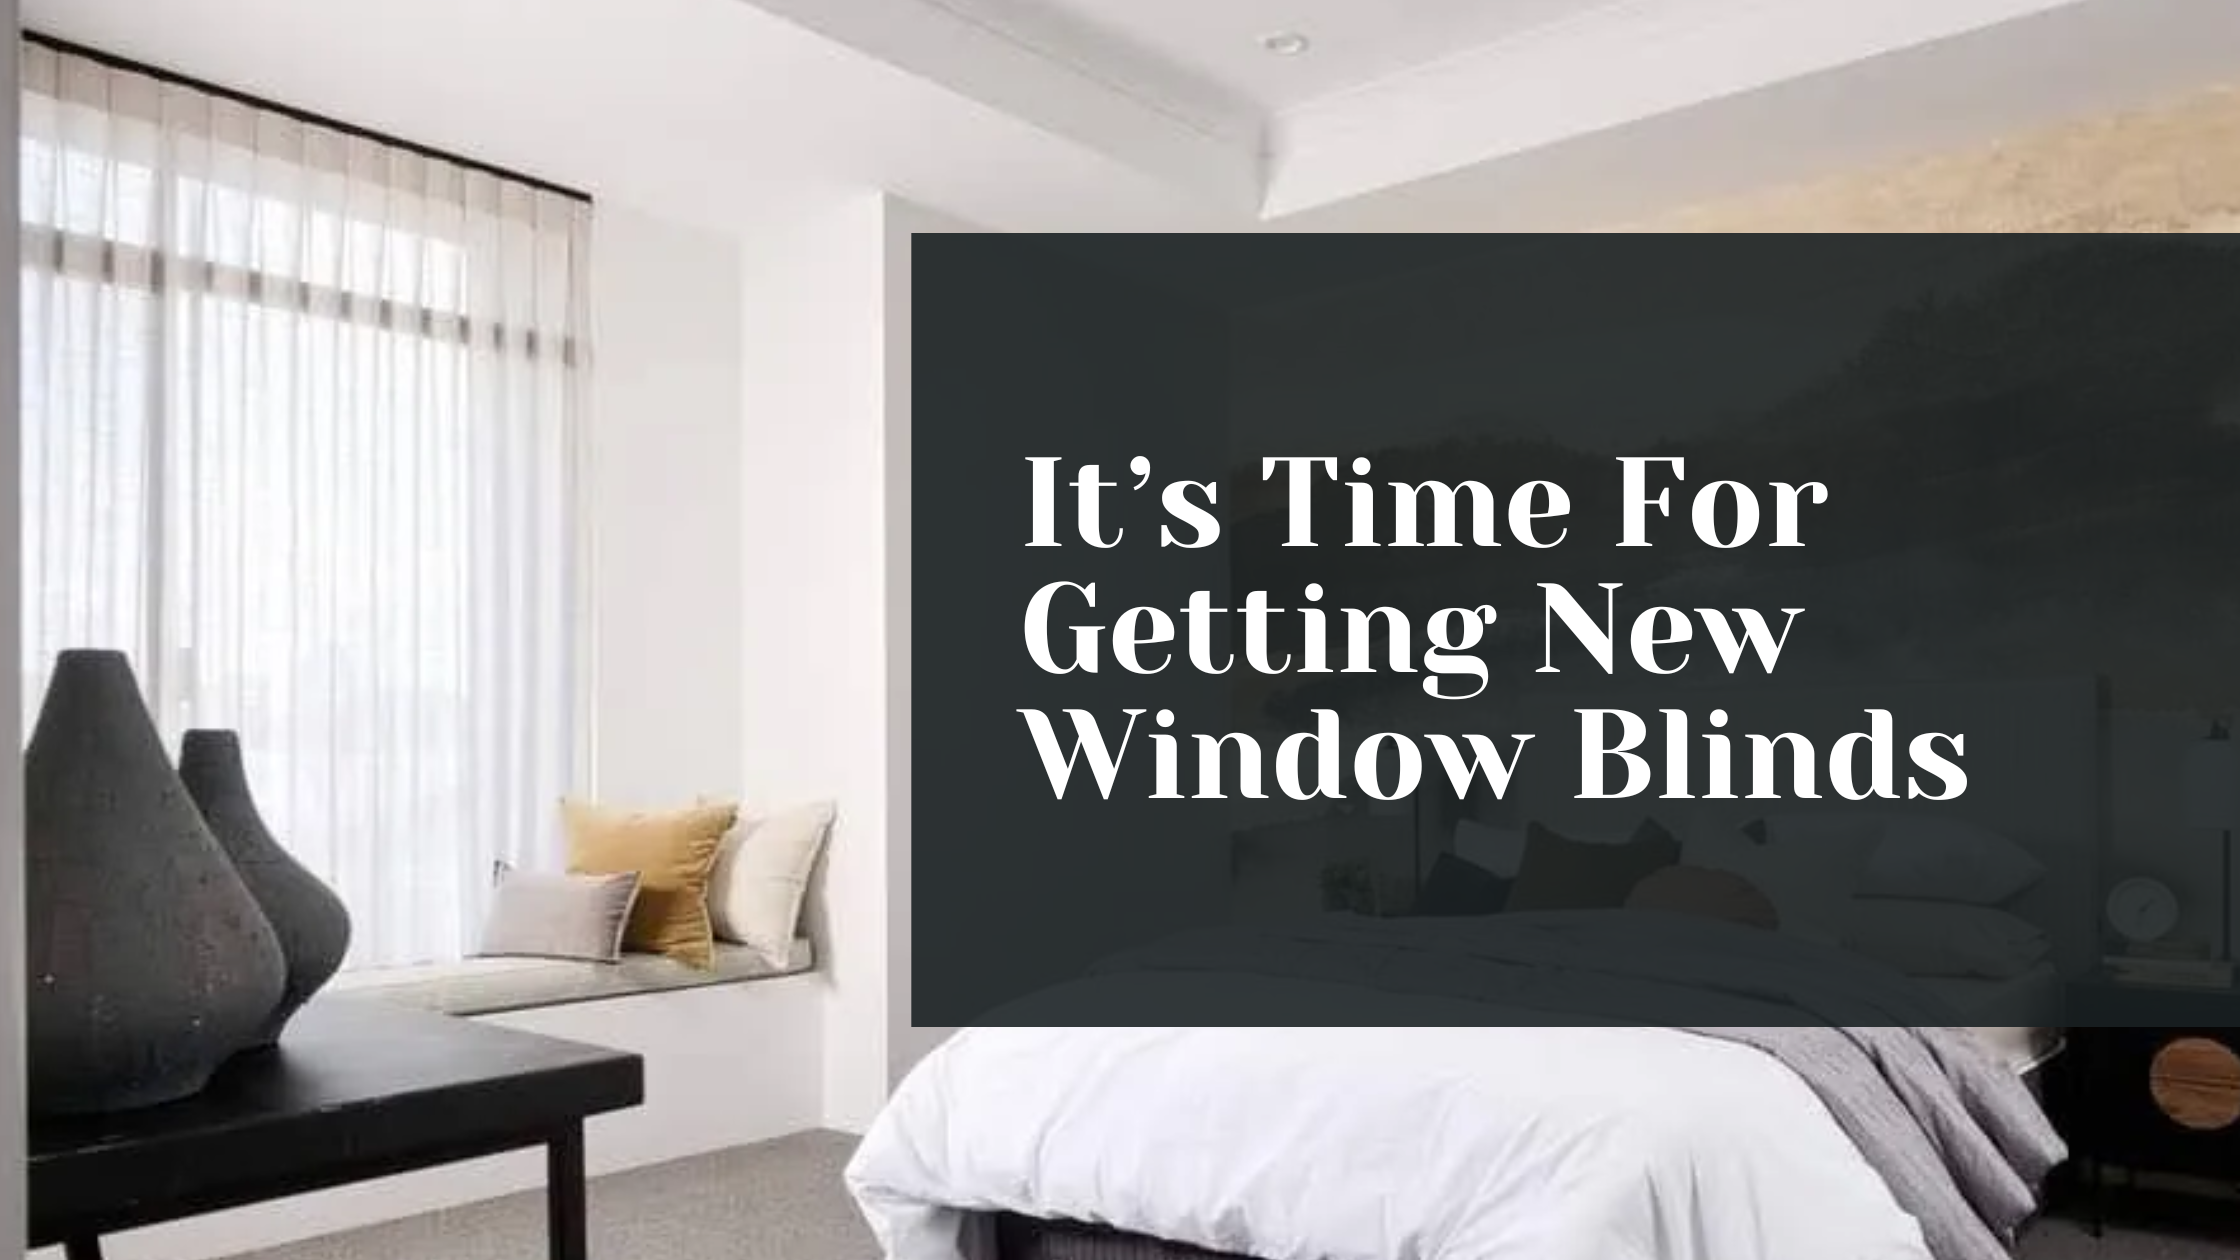 7 Signs Stating It’s Time To Replace Your Window Blinds